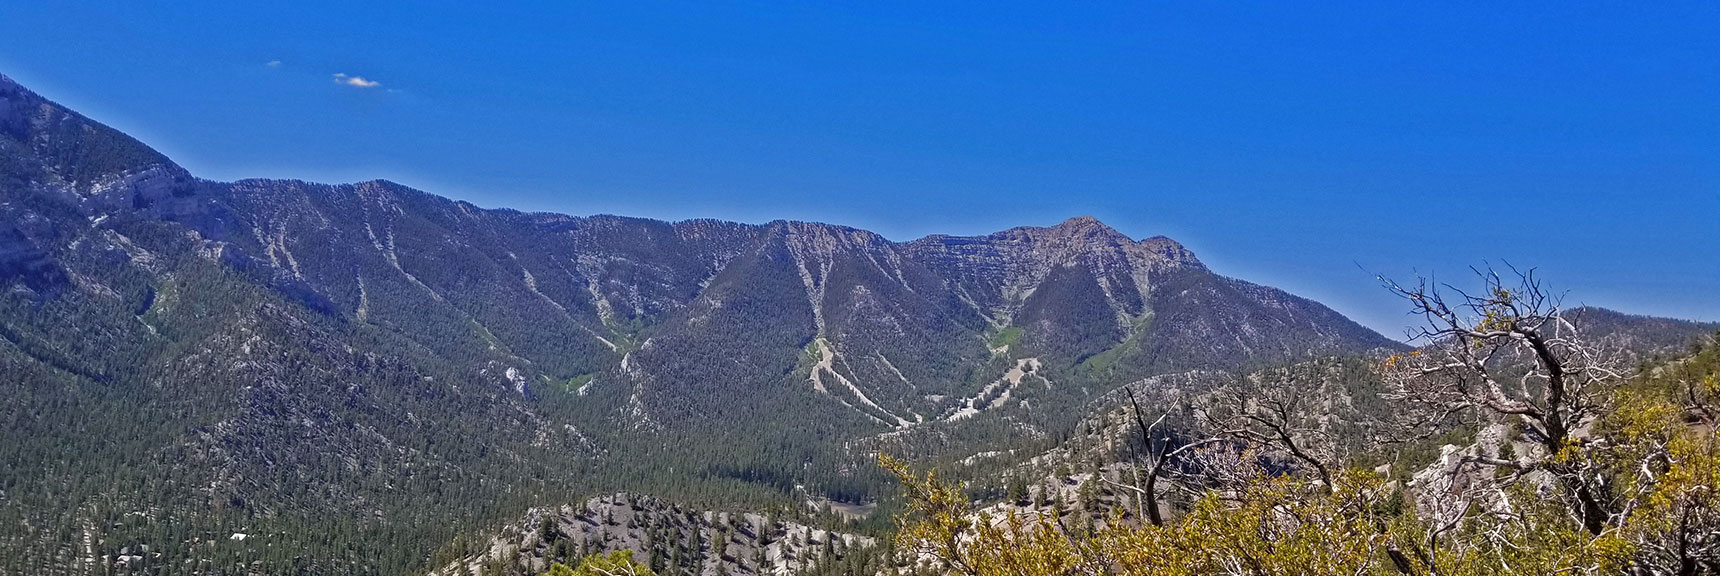 Foxtail Canyon Approach is Central, to Left of Ski Area | Lee Canyon to Kyle Canyon | Potential Routes | Mt Charleston Wilderness | Spring Mountains, Nevada